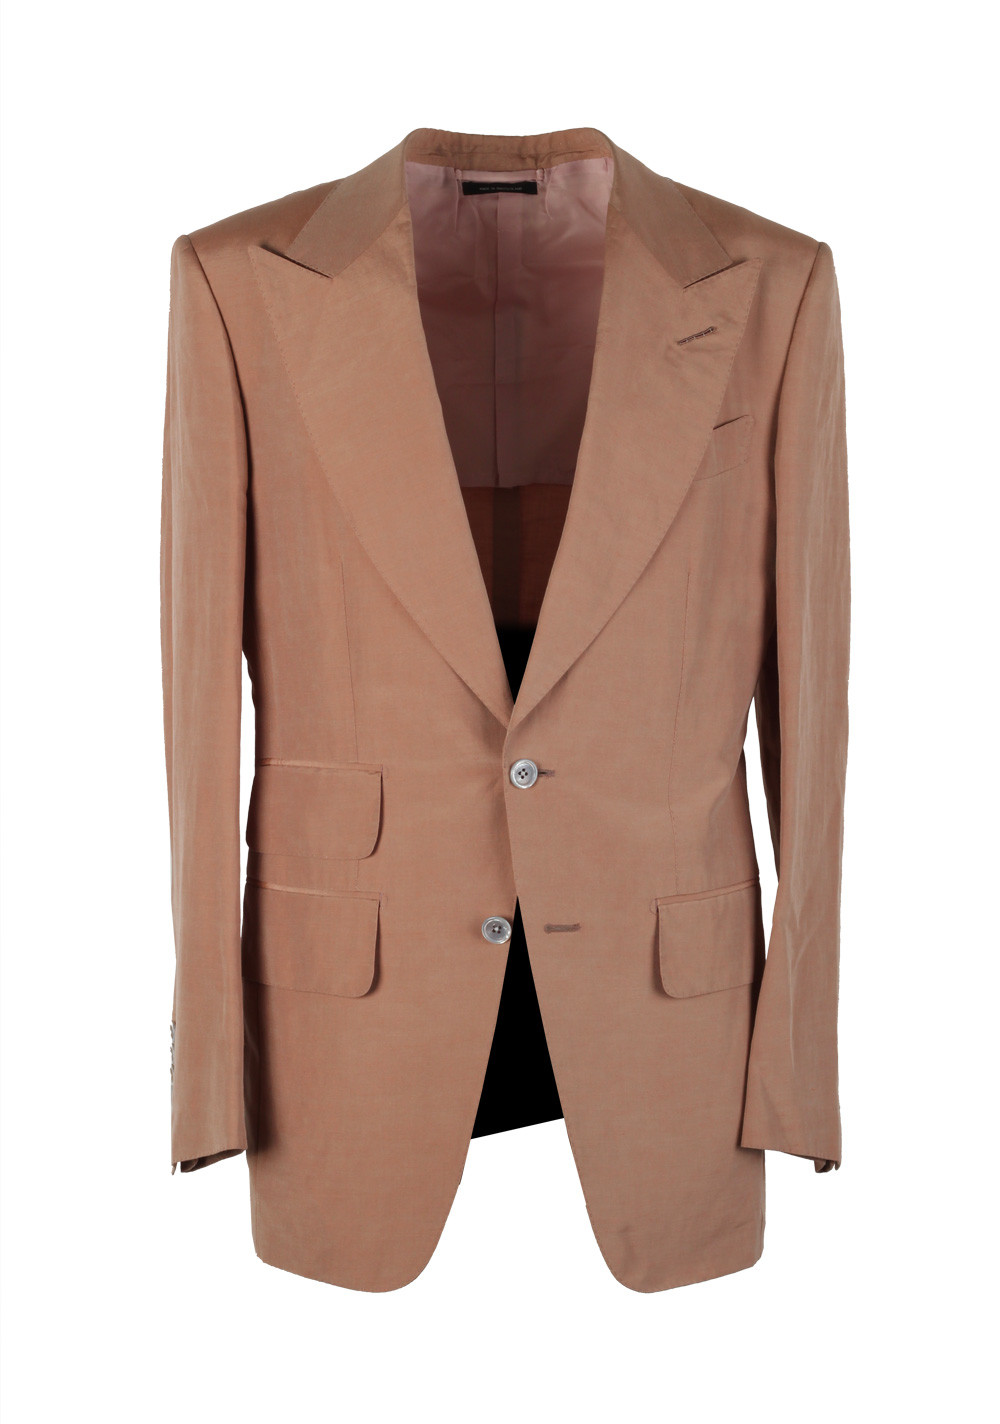 TOM FORD Atticus Brown Suit Size 46 / 36R U.S. In Silk Linen | Costume ...